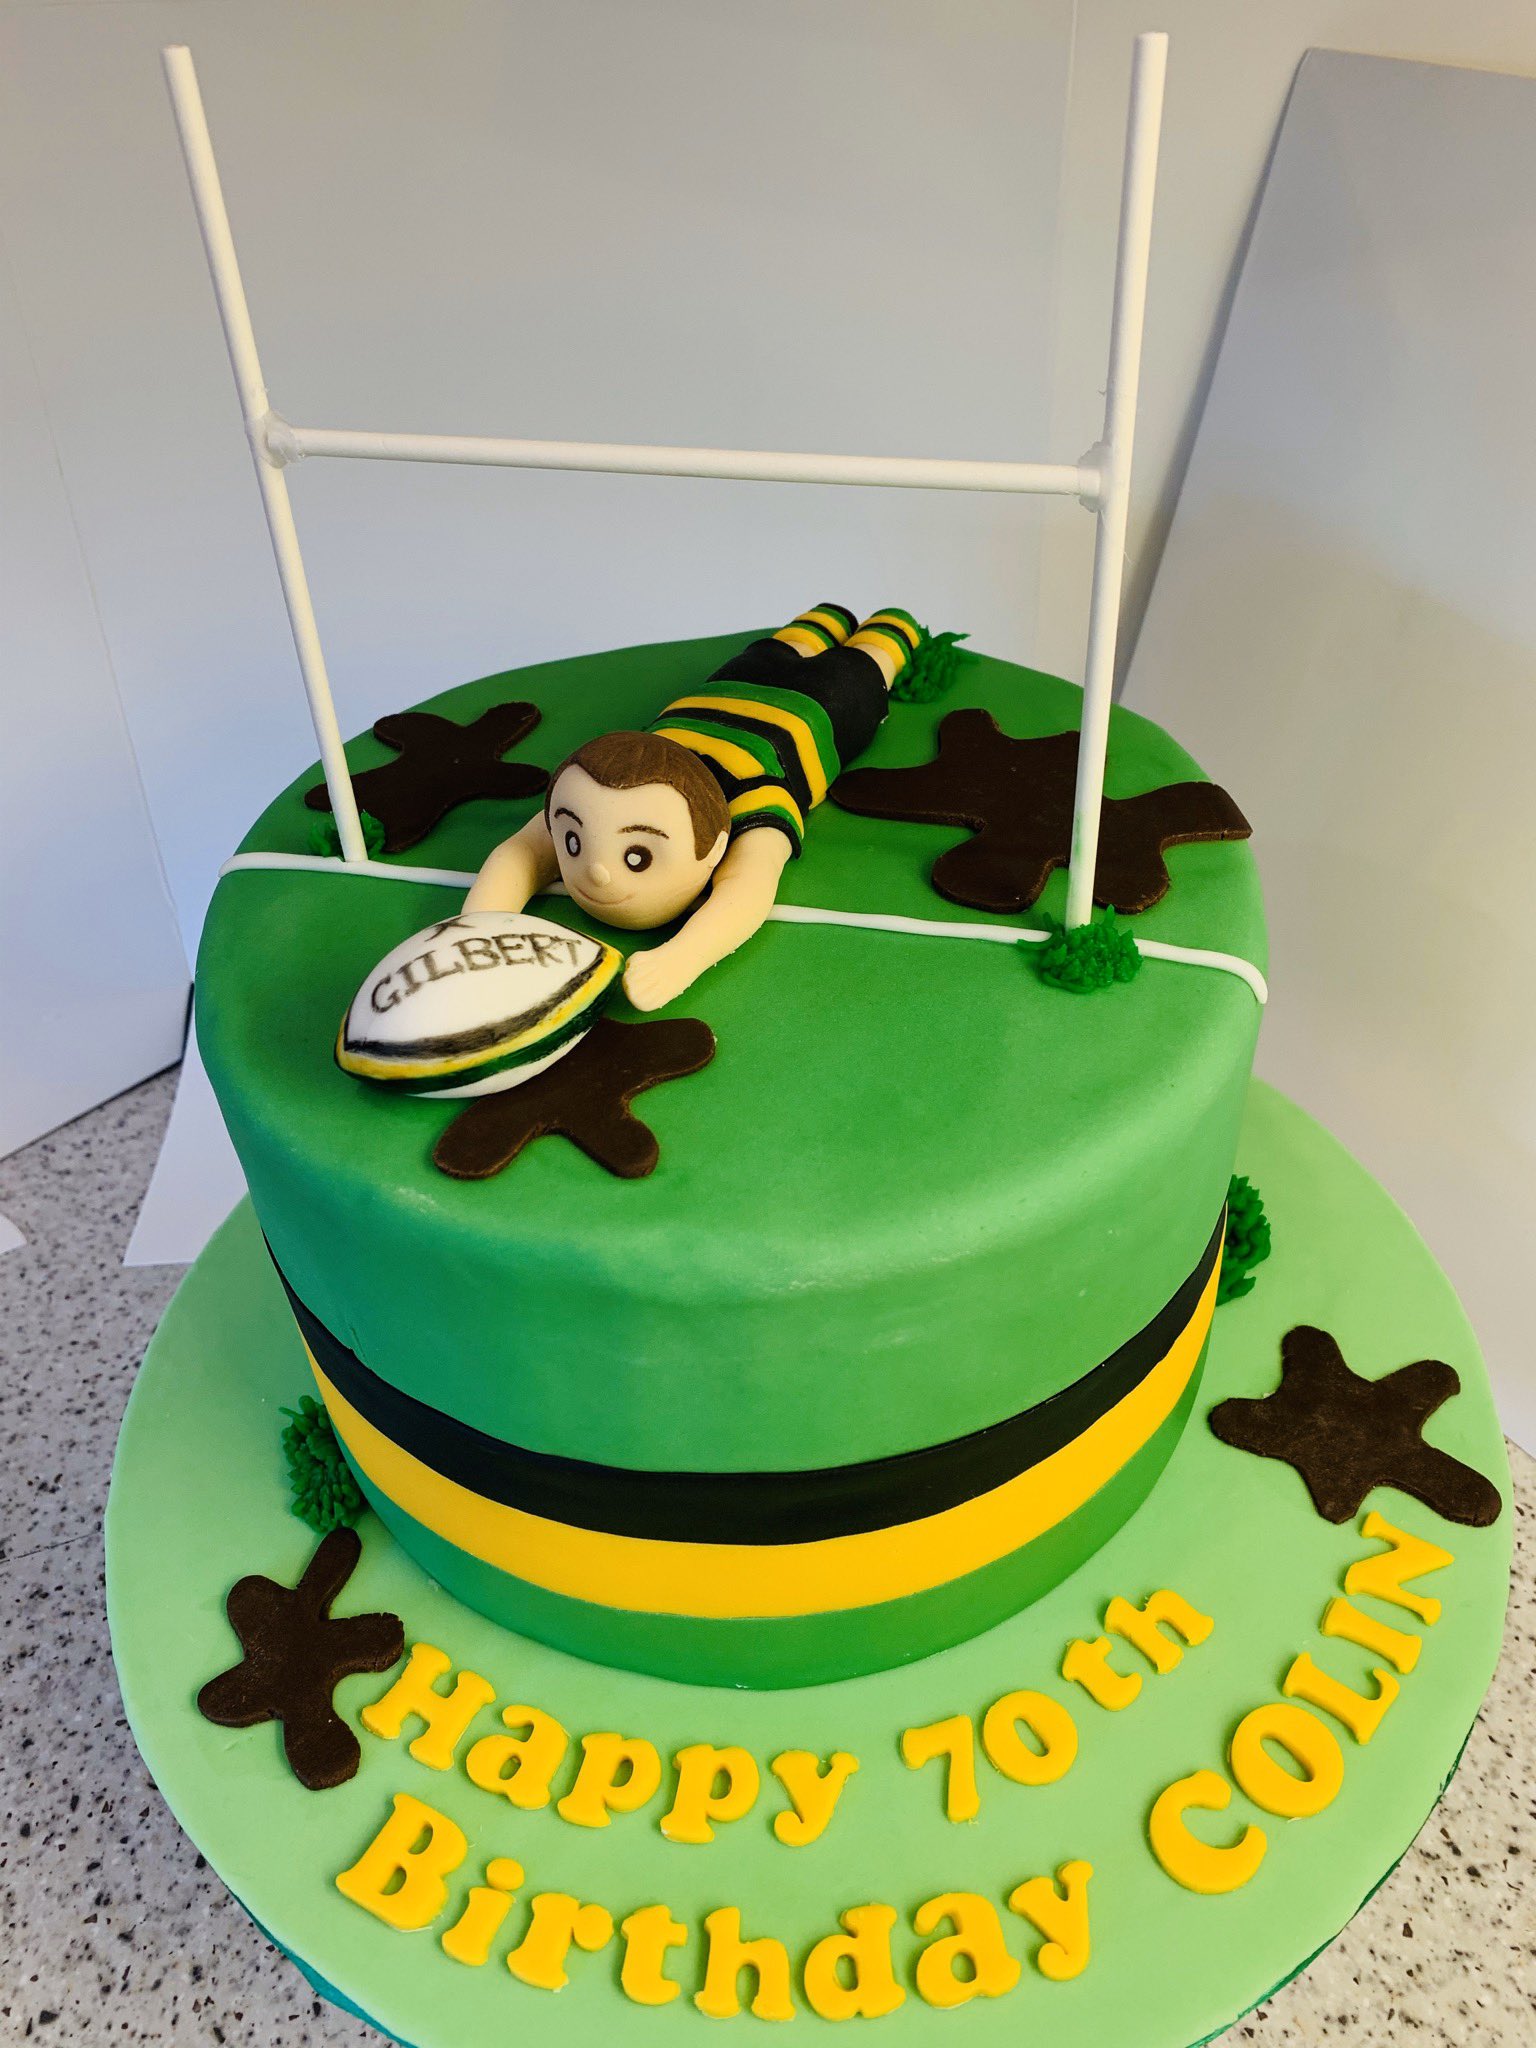 3D Rugby Ball Birthday Cake | Imaginative Icing - Cakes - Scarborough,  York, Malton, Leeds, Hull, Bridlington, Whitby, Filey, and across the UK